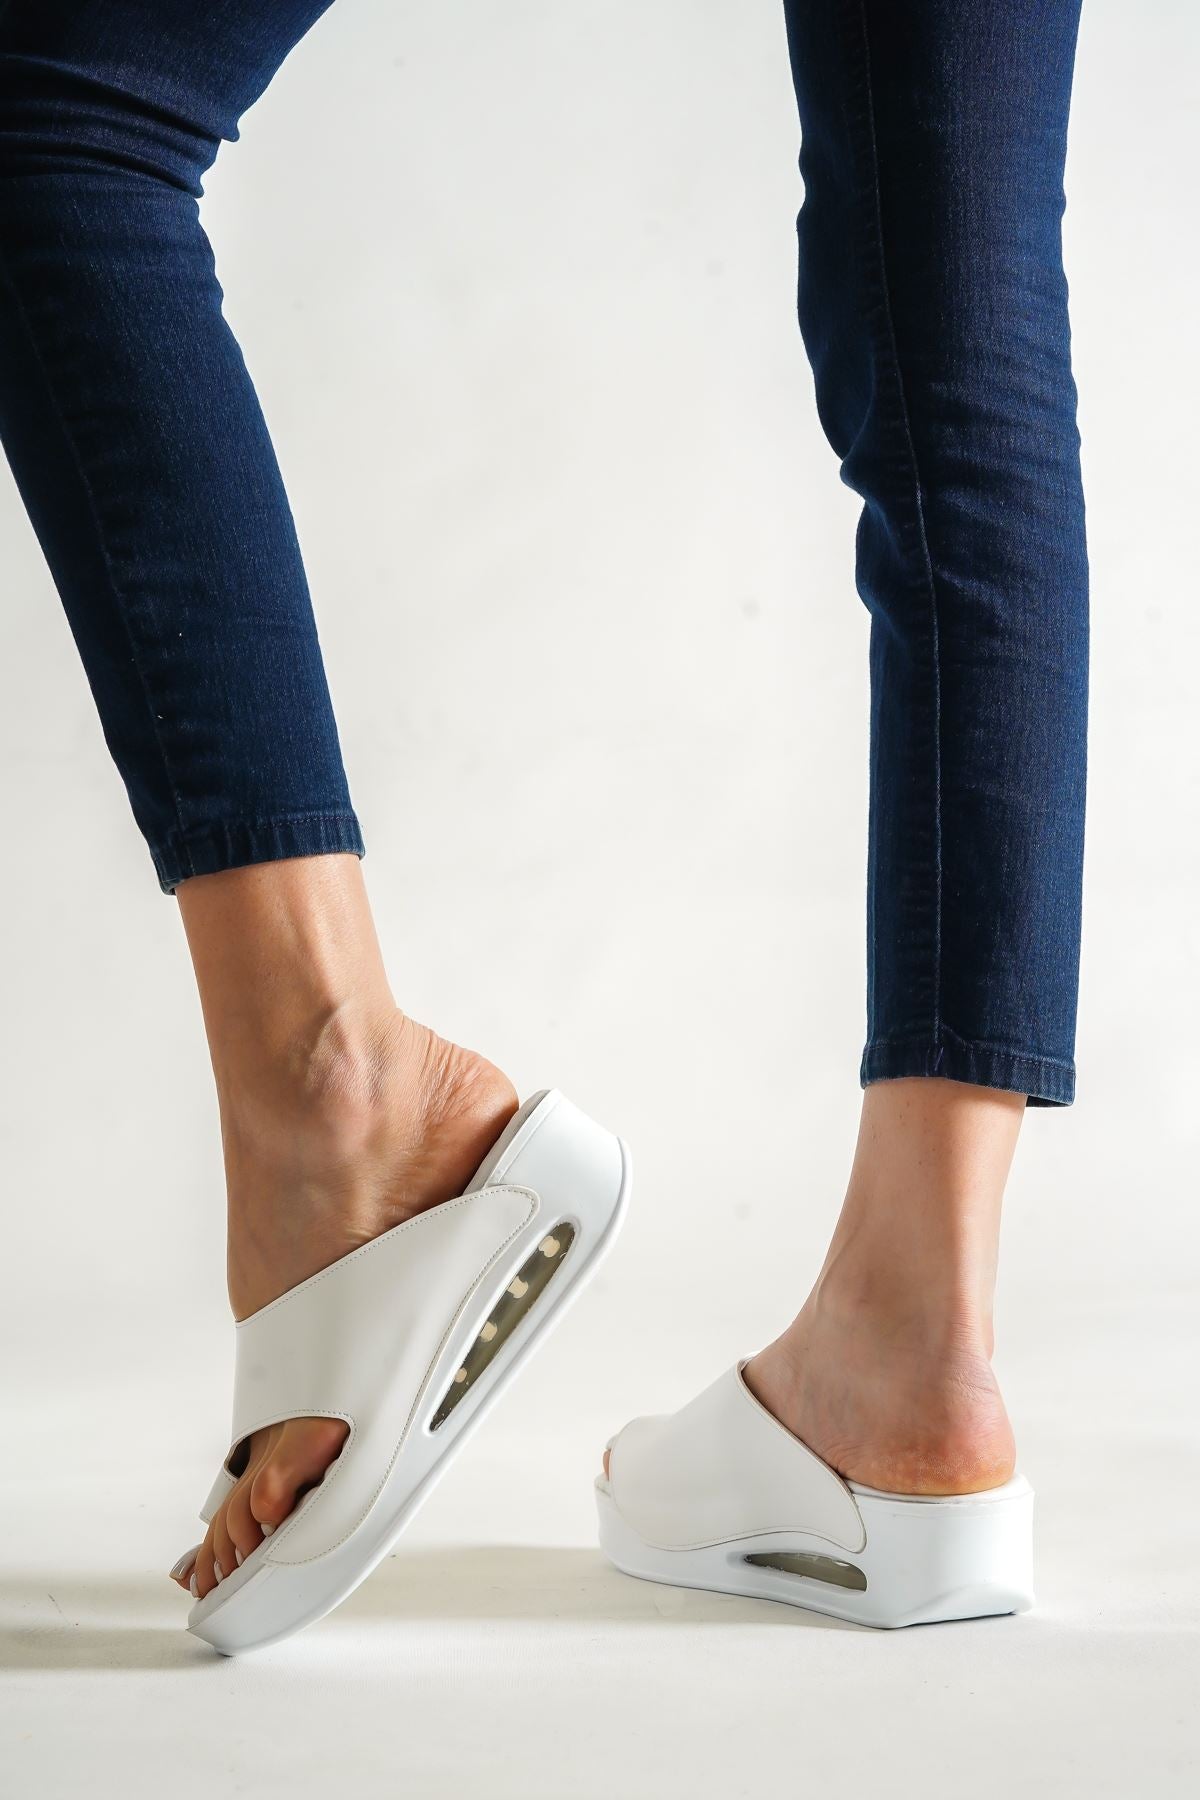 Women's Tools 100% Genuine White Leather Slippers - STREETMODE™